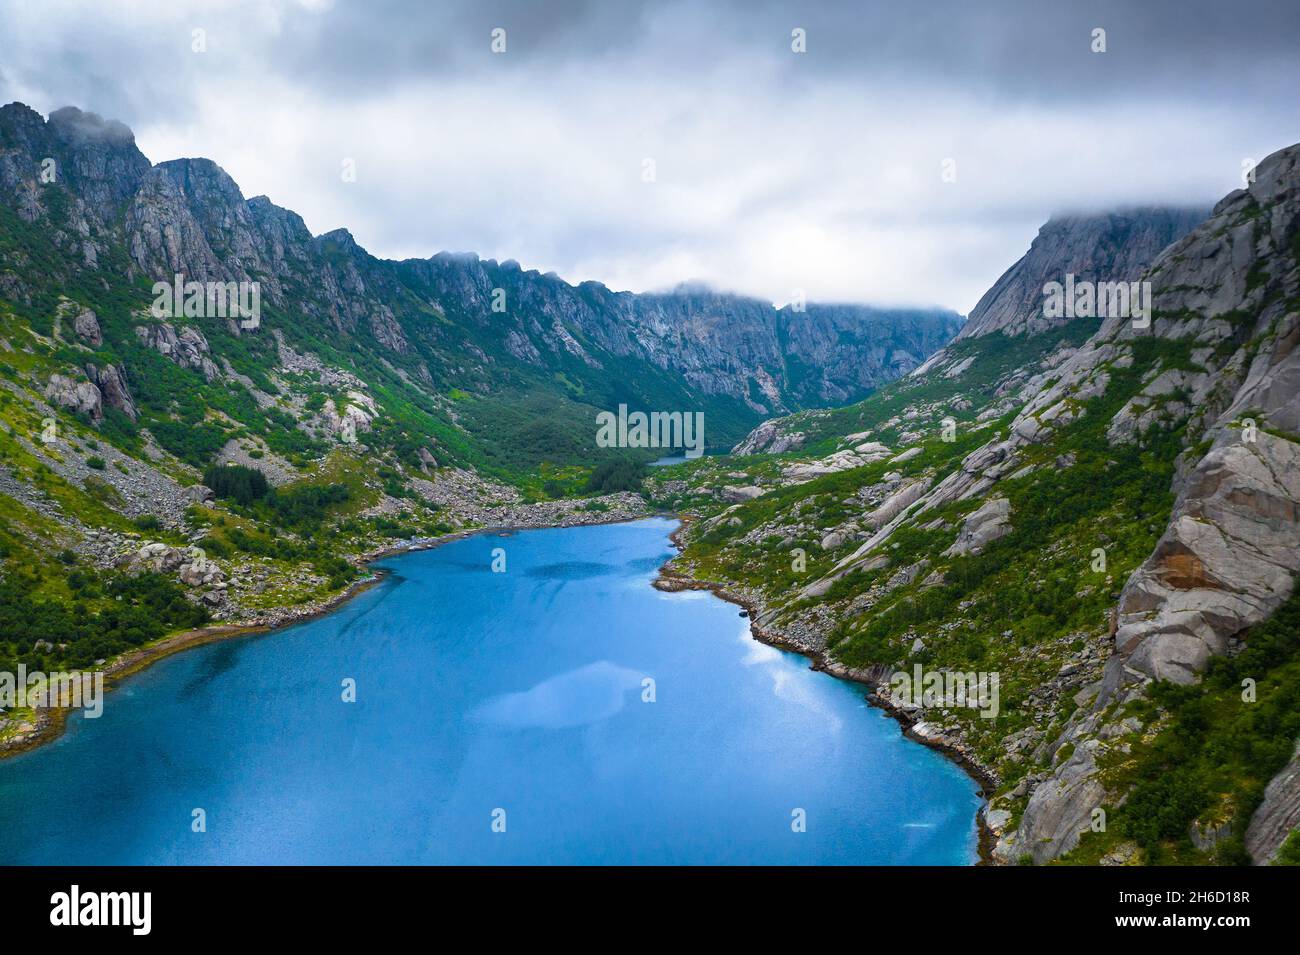 Aerial view of mountains and a lake in Lofoten Islands, Norway Stock Photo